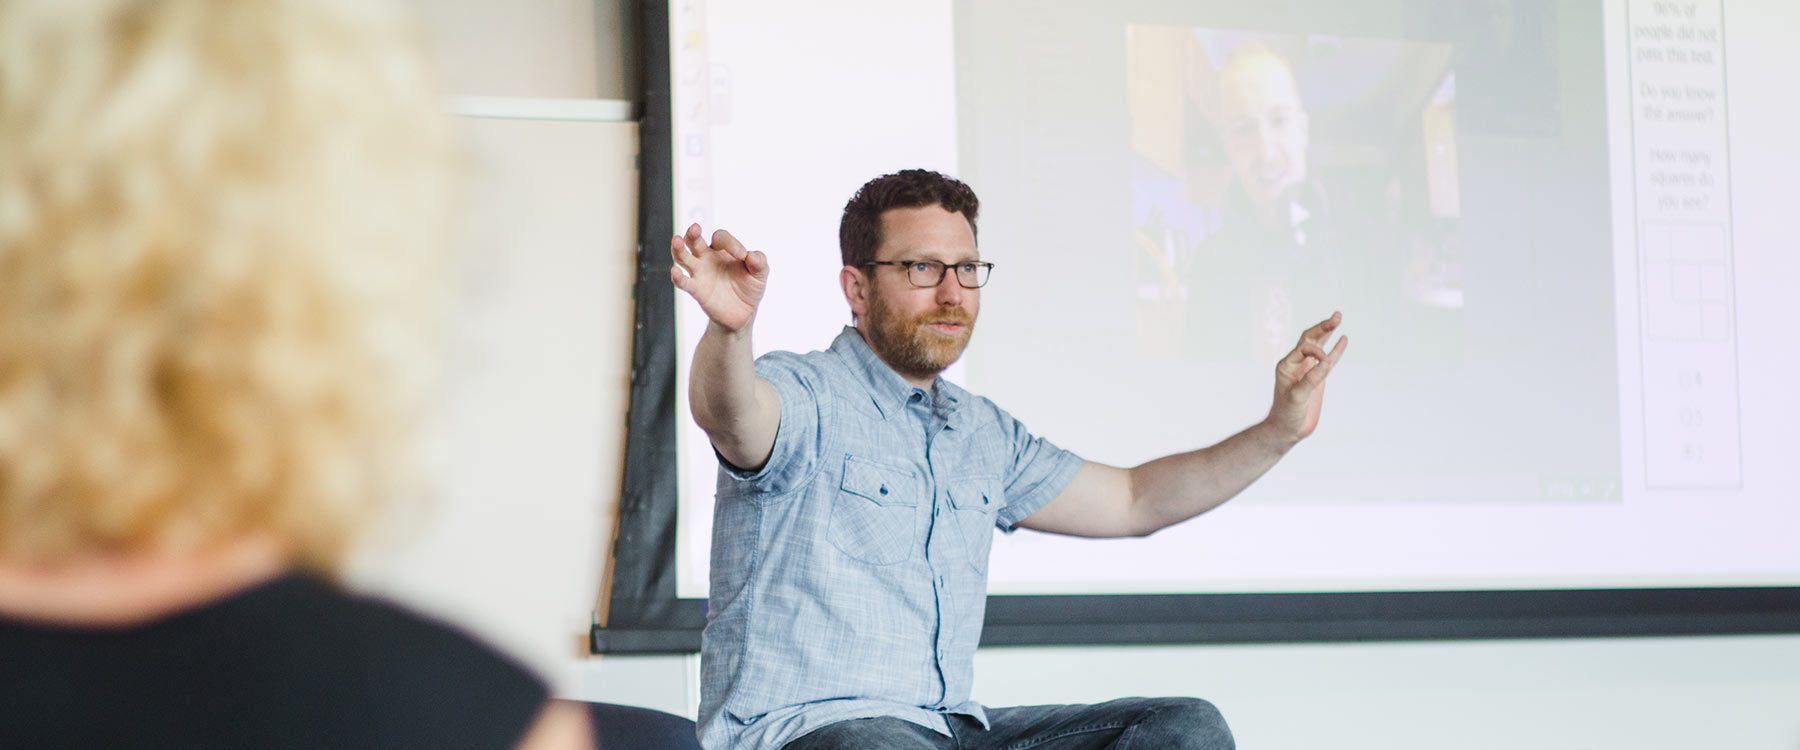 A professor gestures with both arms in front of a projector screen, presenting a lecture.